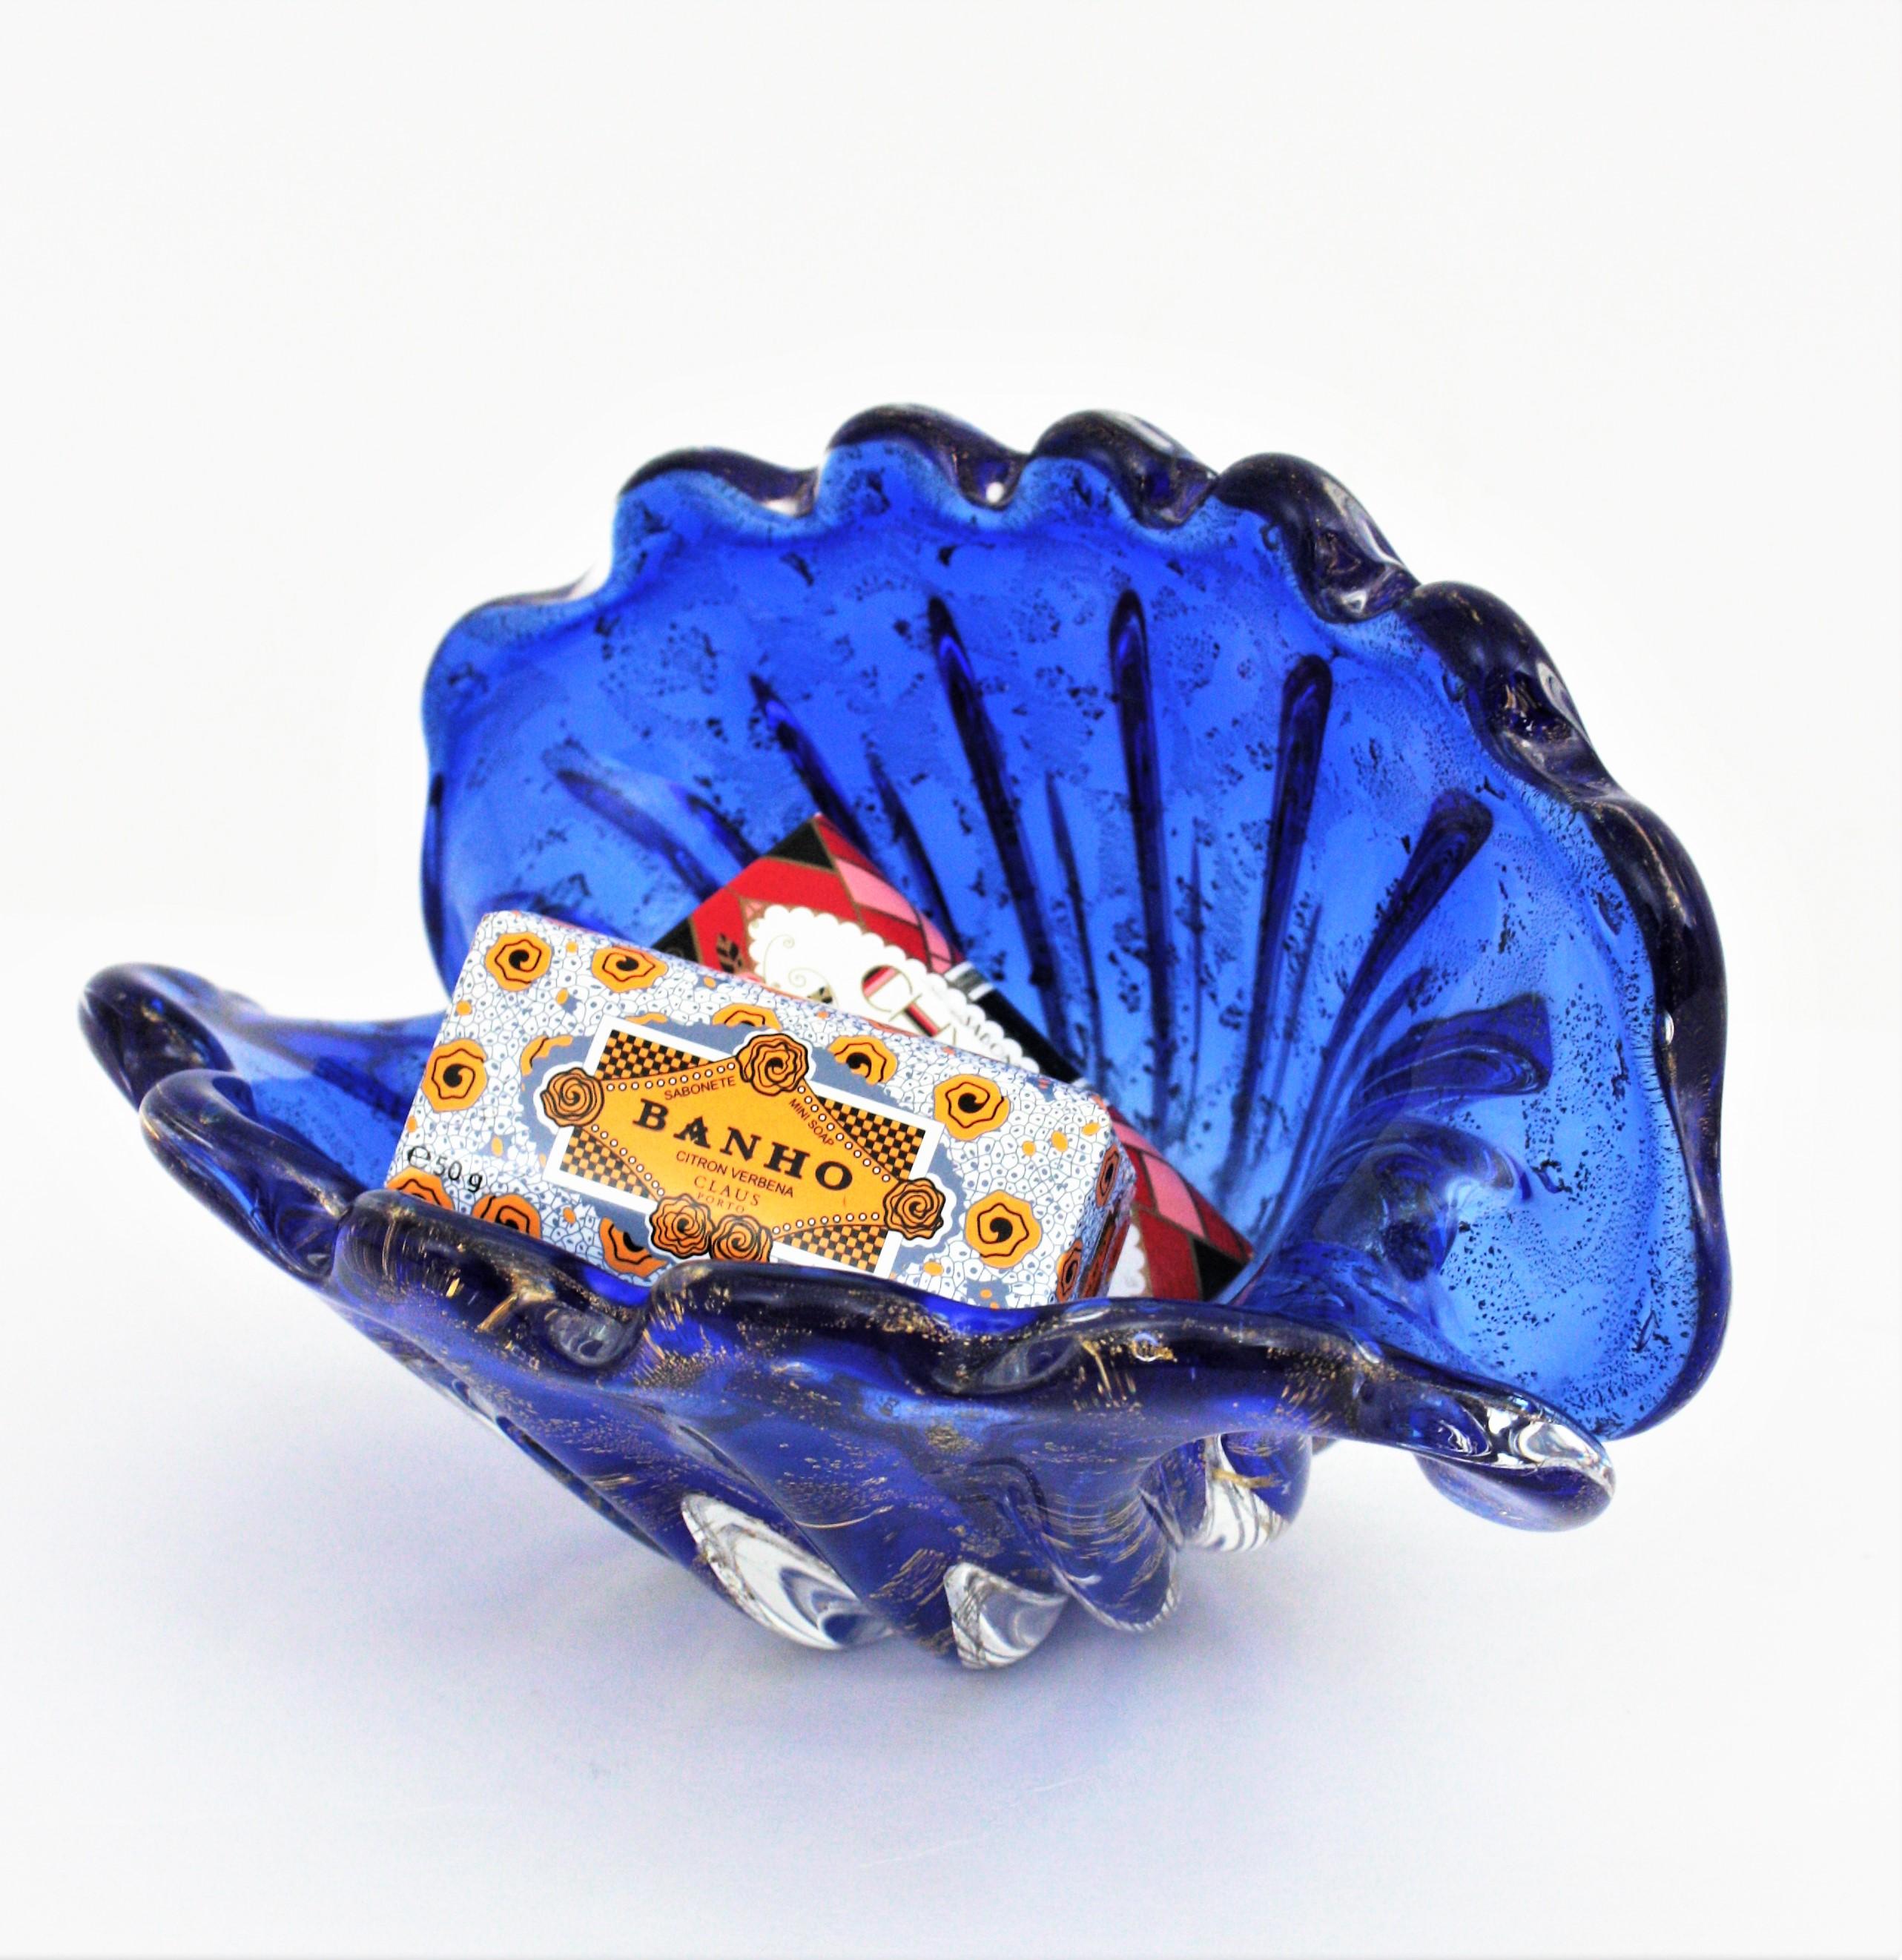 Amazing hand blown clam shell bowl in cobalt blue glass with gold flecks. Attributed to Archimede Seguso, Italy, 1950-1960.
This large clam shell bowl has an eye-catching color with blue glass submerged into clear glass with inclusions of